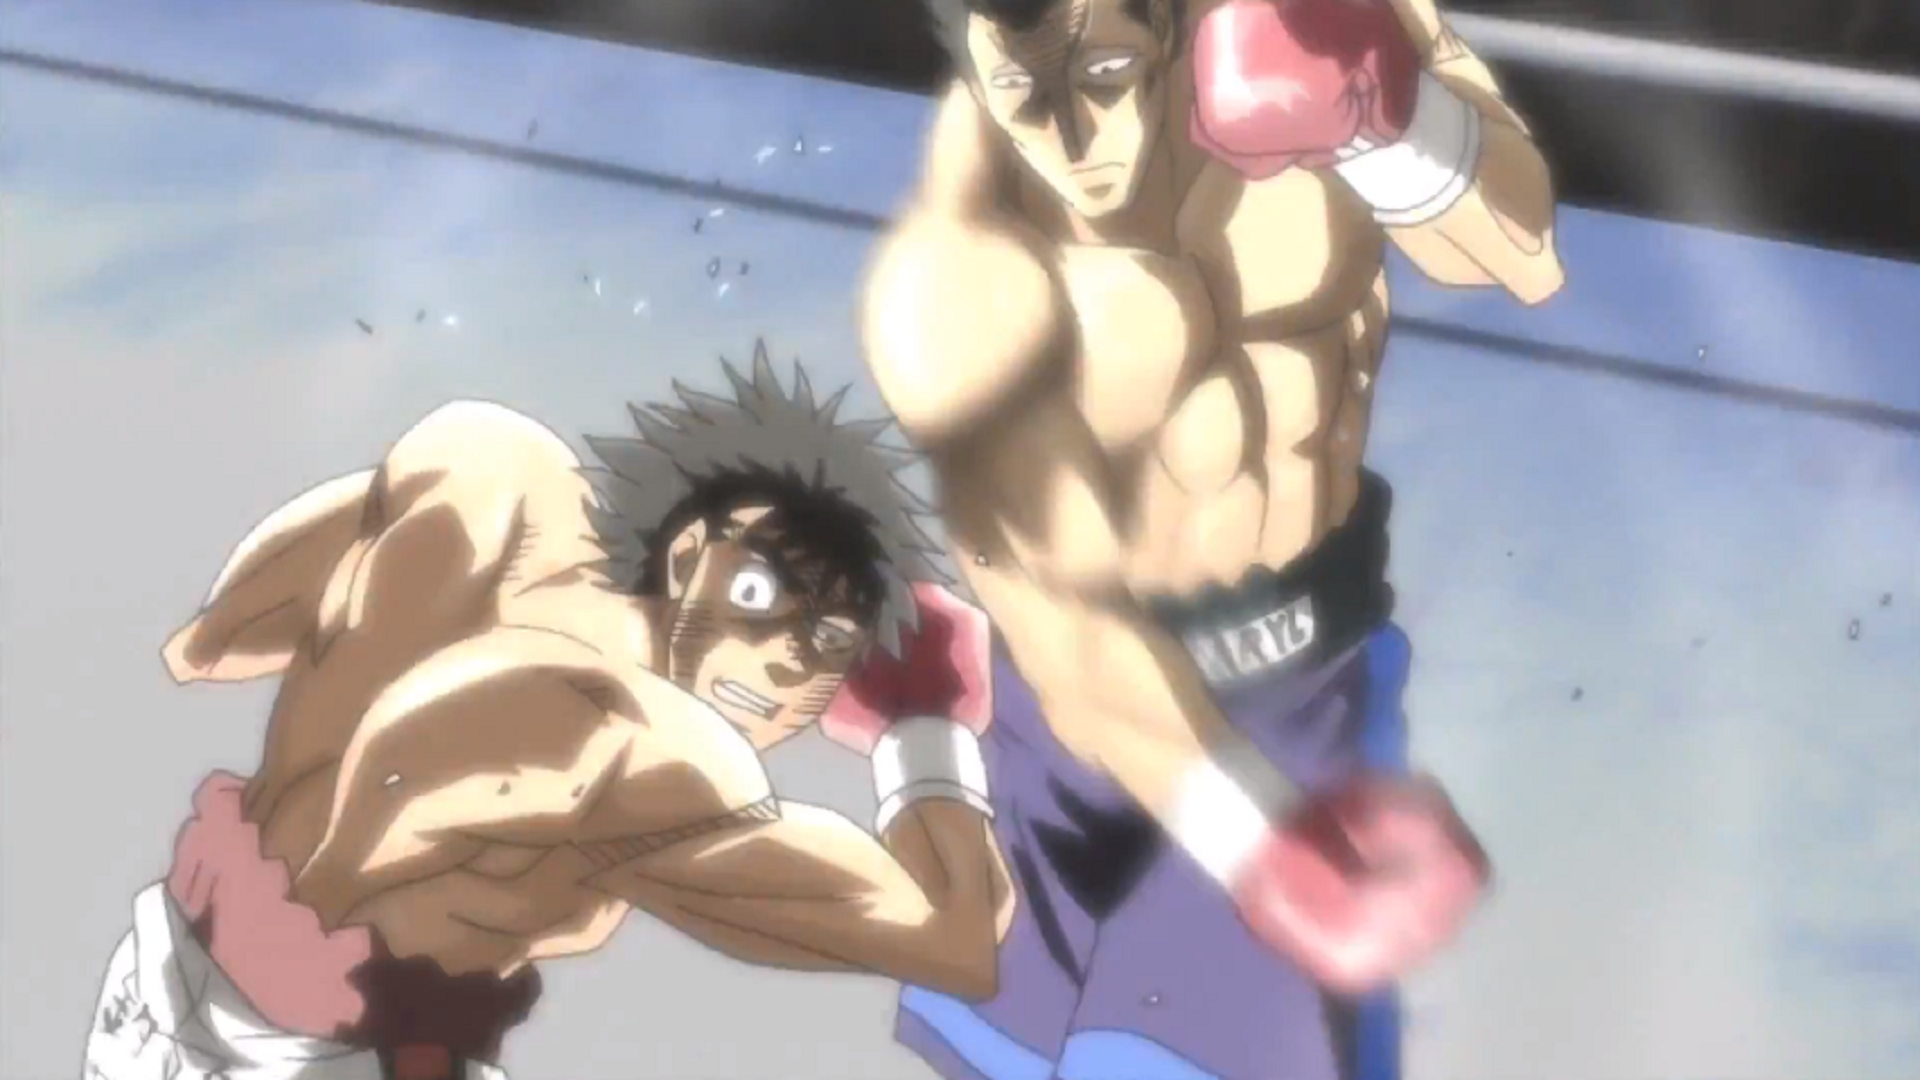 Hajime No Ippo Rising: Dempsey roll 2.0 against Sawamura vostFR (eng sub in  settings) 